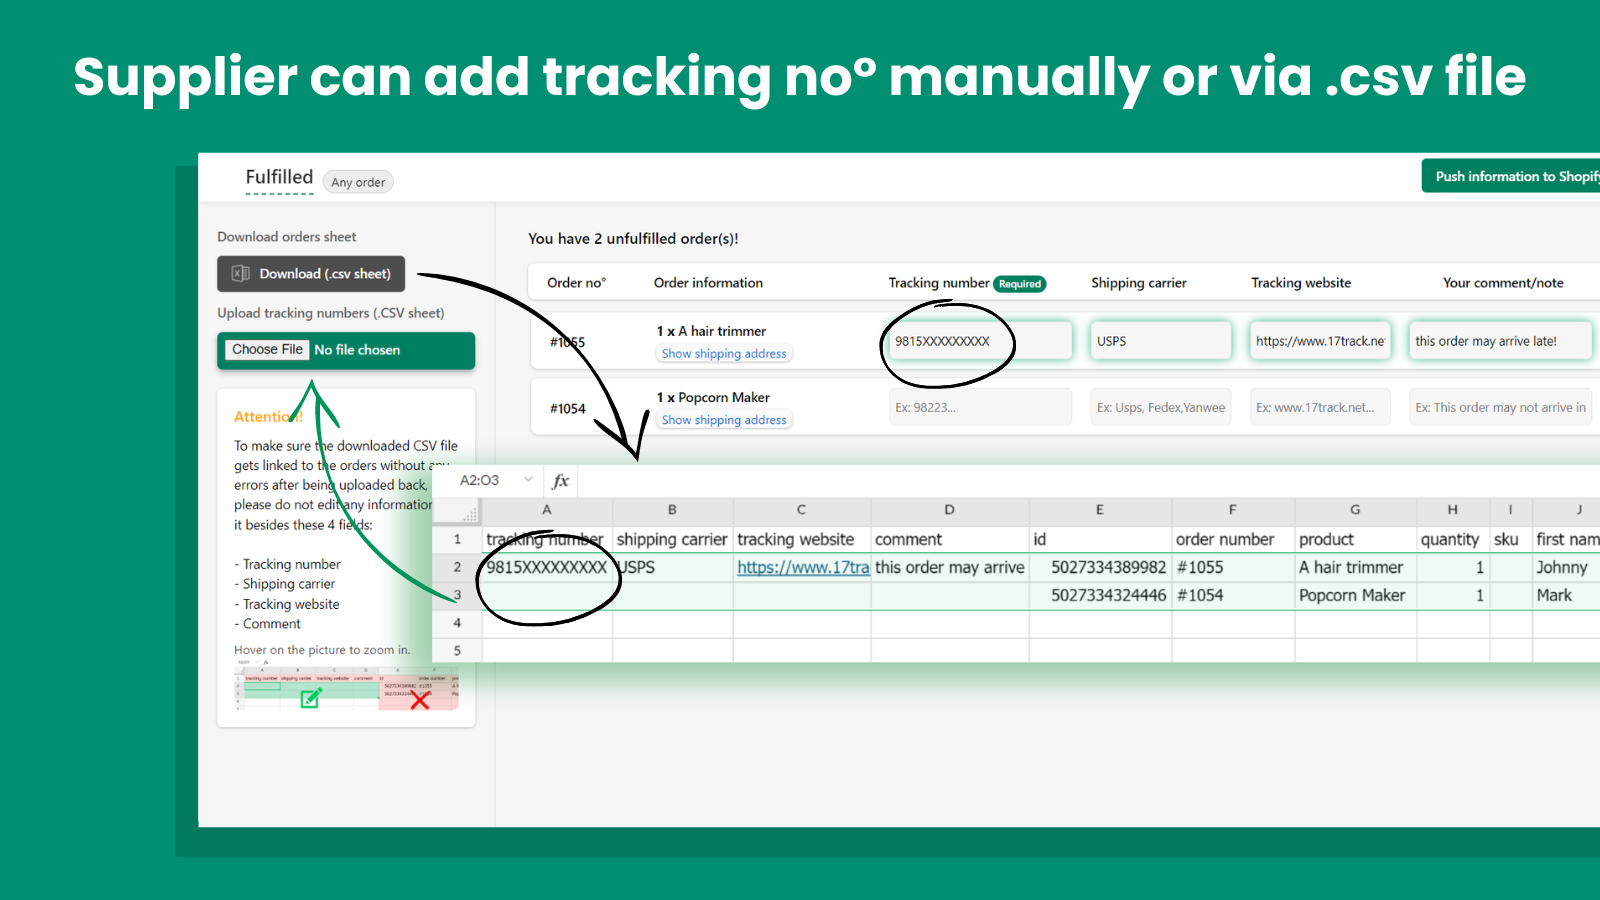 Supplier can update orders manually or by uploading a CSV file.